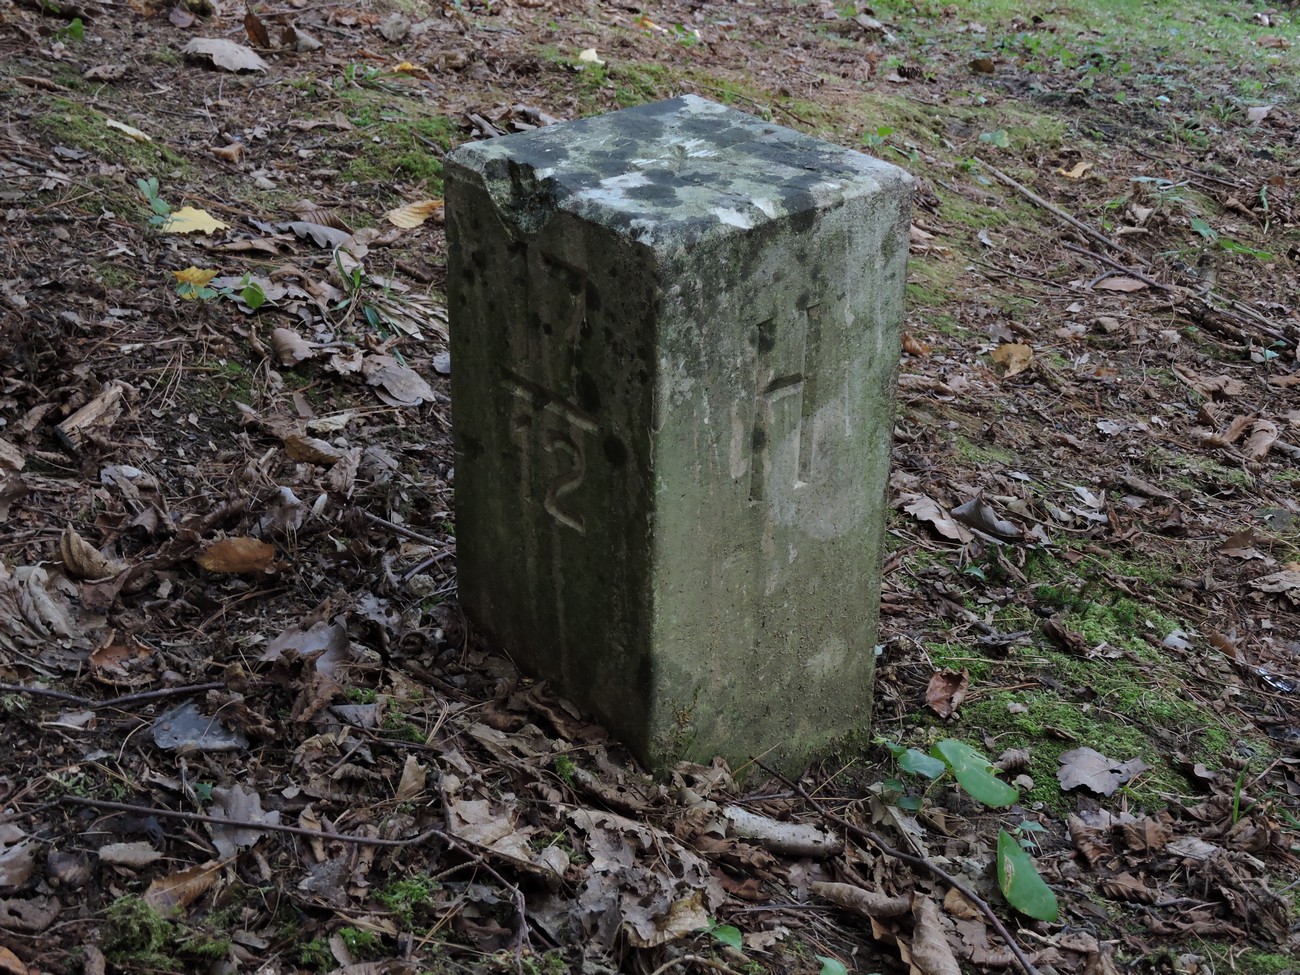 A boundary marker between the Independent State of Croatia and Germany at Nova vas. Author: Matija Zorn.